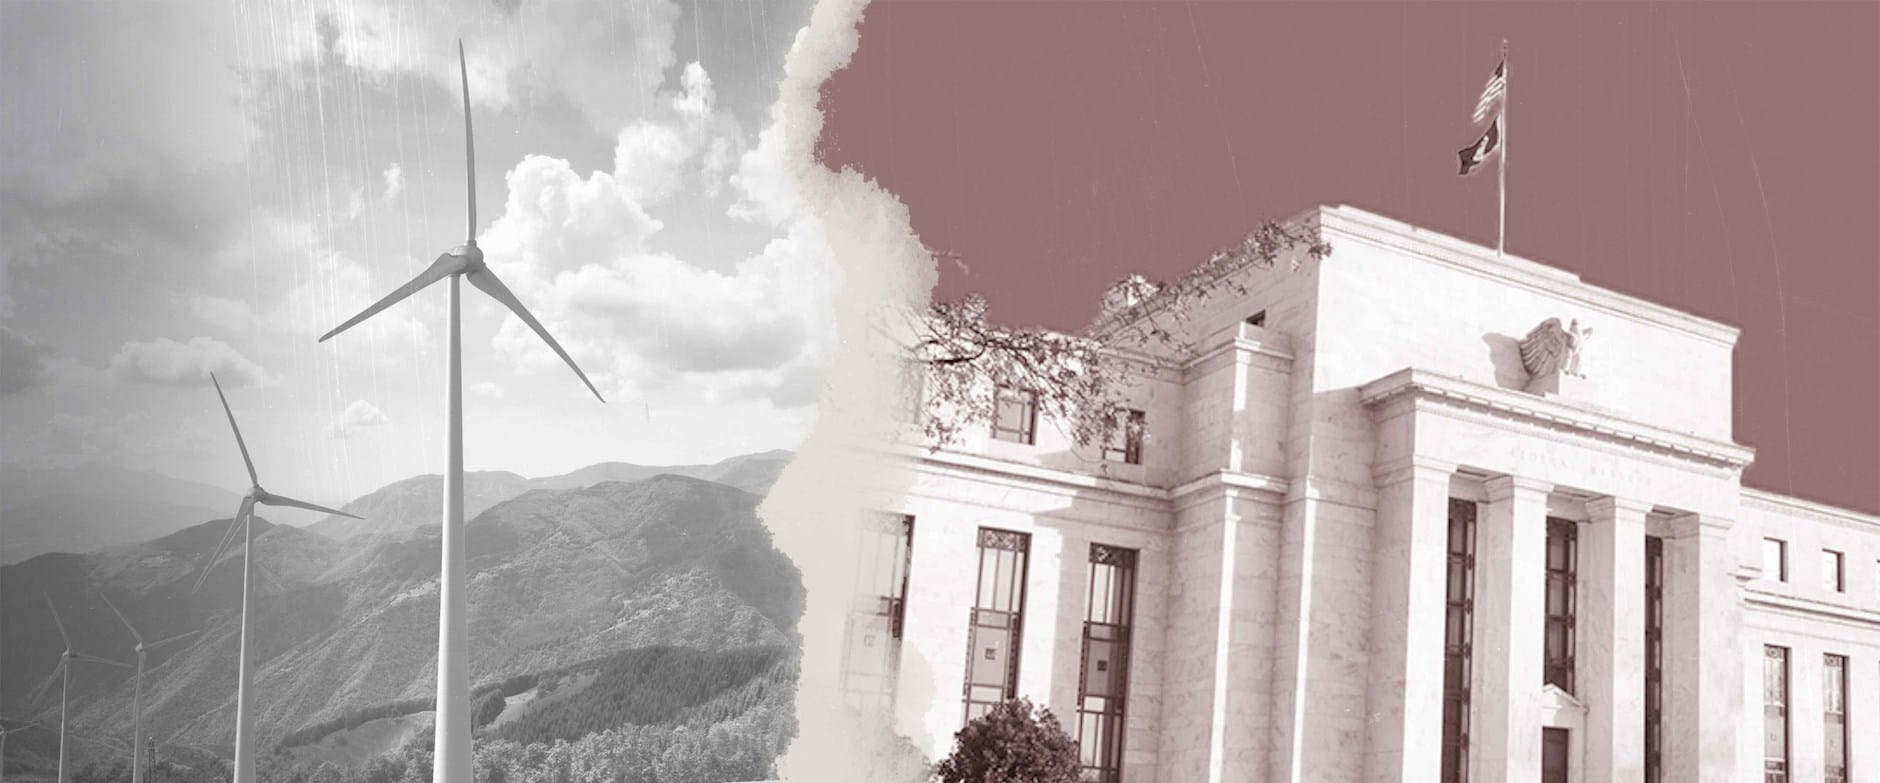 Image of windmills set next to image of Federal Reserve building